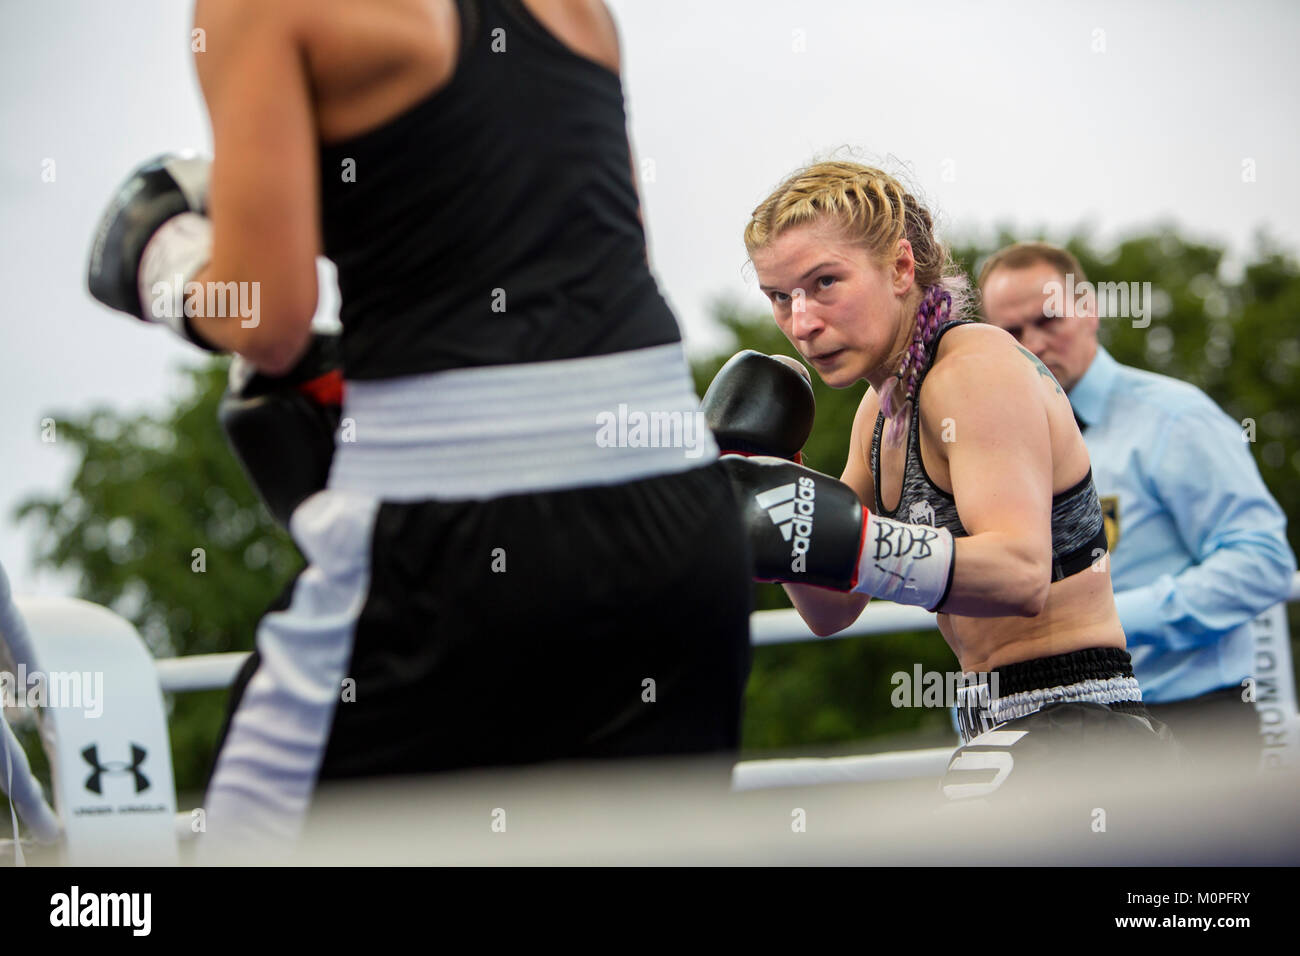 Norway, Bergen - June 09, 2017. The Icelandic boxer Valgerdur Gudsteinsdottir (pictured) fights the Hungarian boxer Marianna Gulyas in the ring during the fight The Battle of Bergen in Bergen. (Photo credit: Gonzales Photo - Jarle H. Moe). Stock Photo